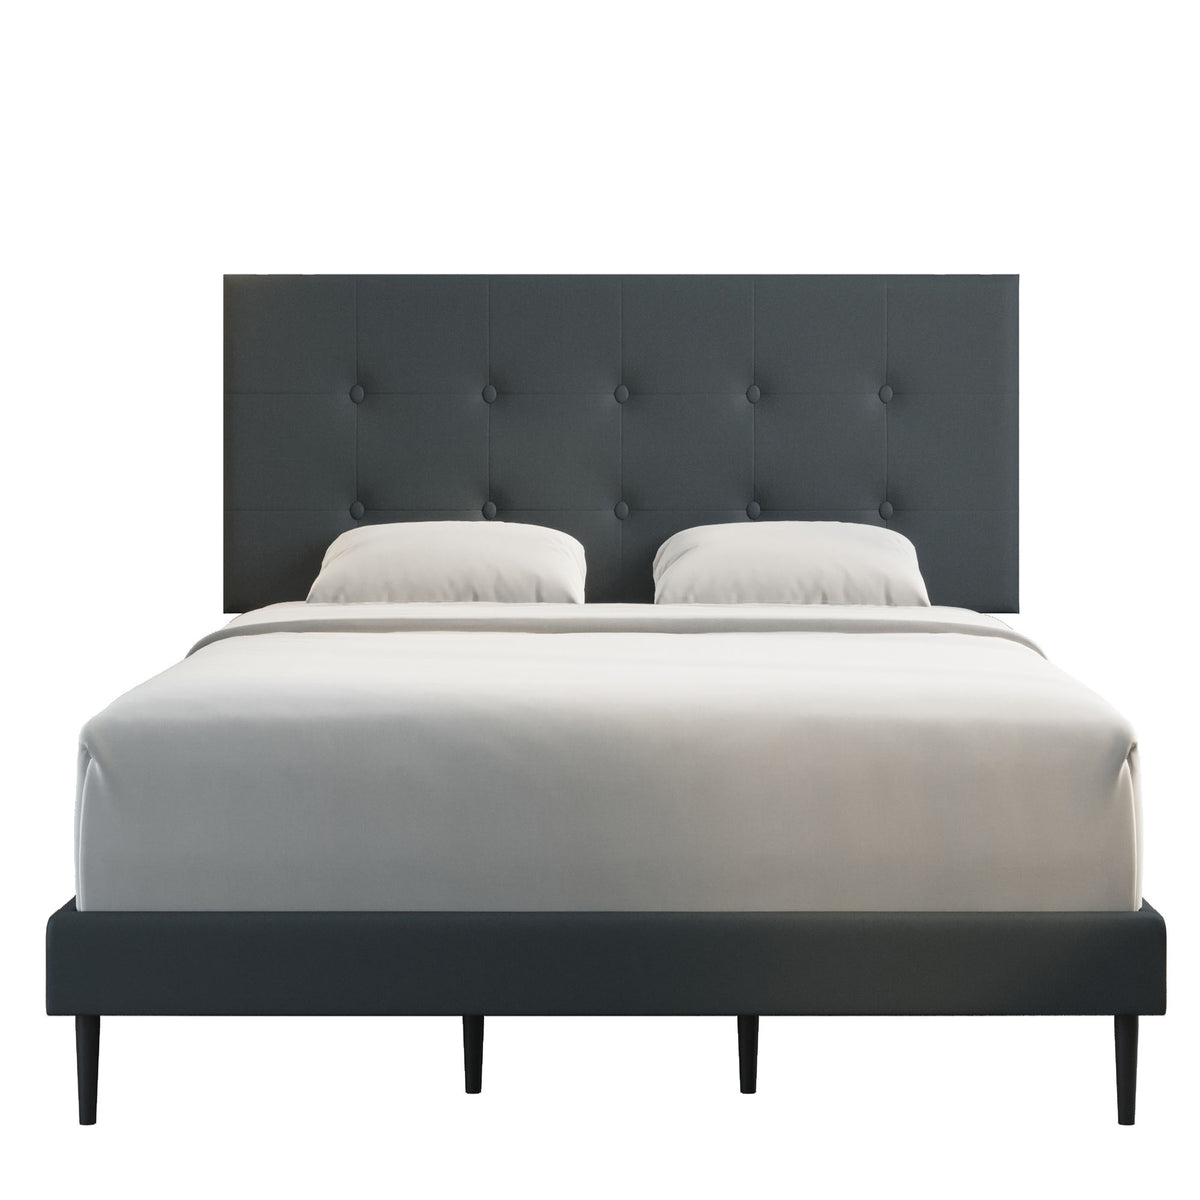 Velets Nora Contemporary Mid-Century Soft Padded Tufted Fabric Upholstered Low-profile Platform Bed with Adjustable Headboard - Solid Wood Frame Construction, Wood Slat System - Dark Gray